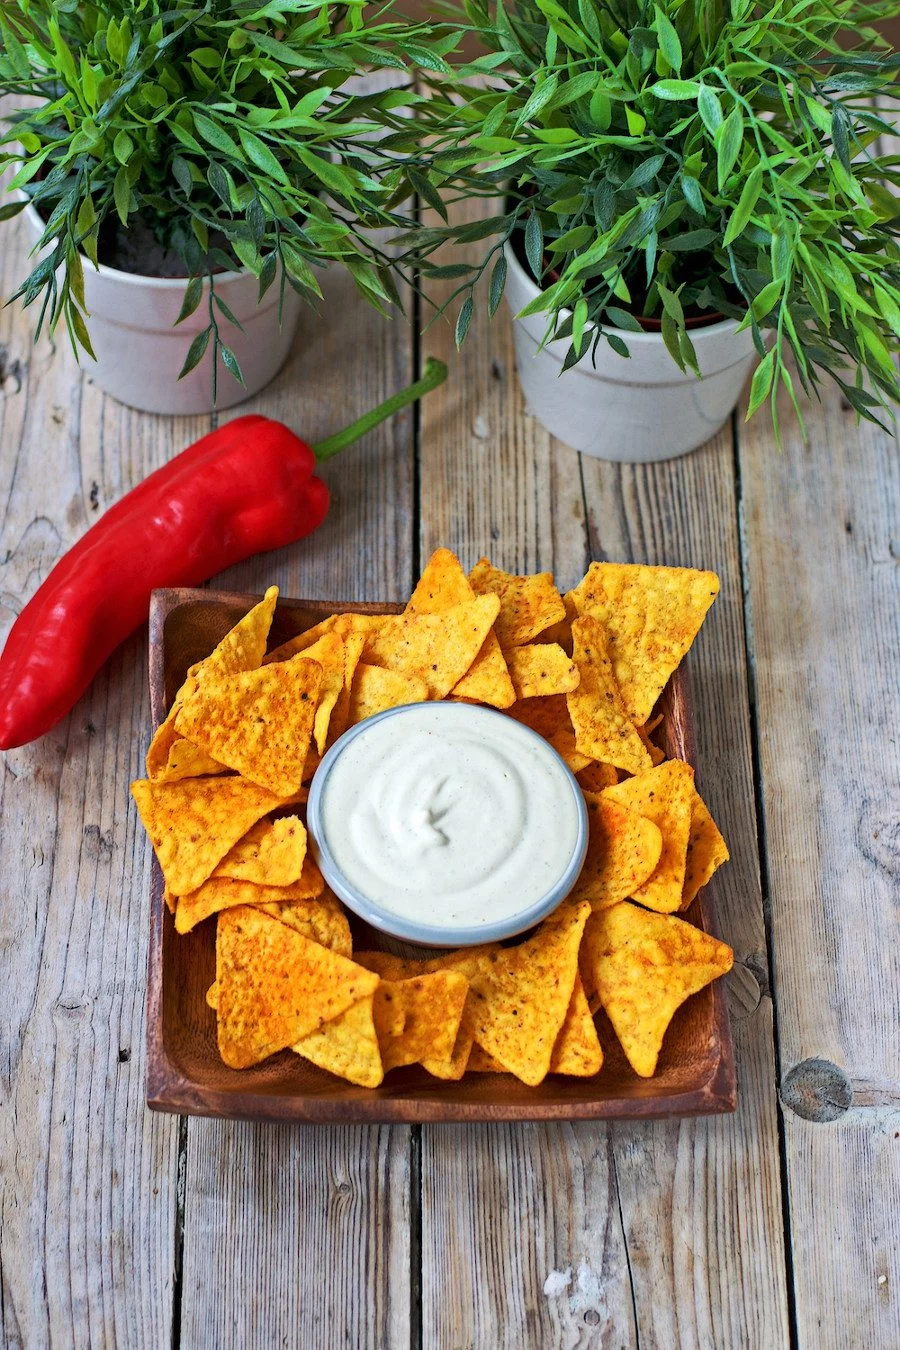 Vegan Cheese Sauce with tortilla chips.